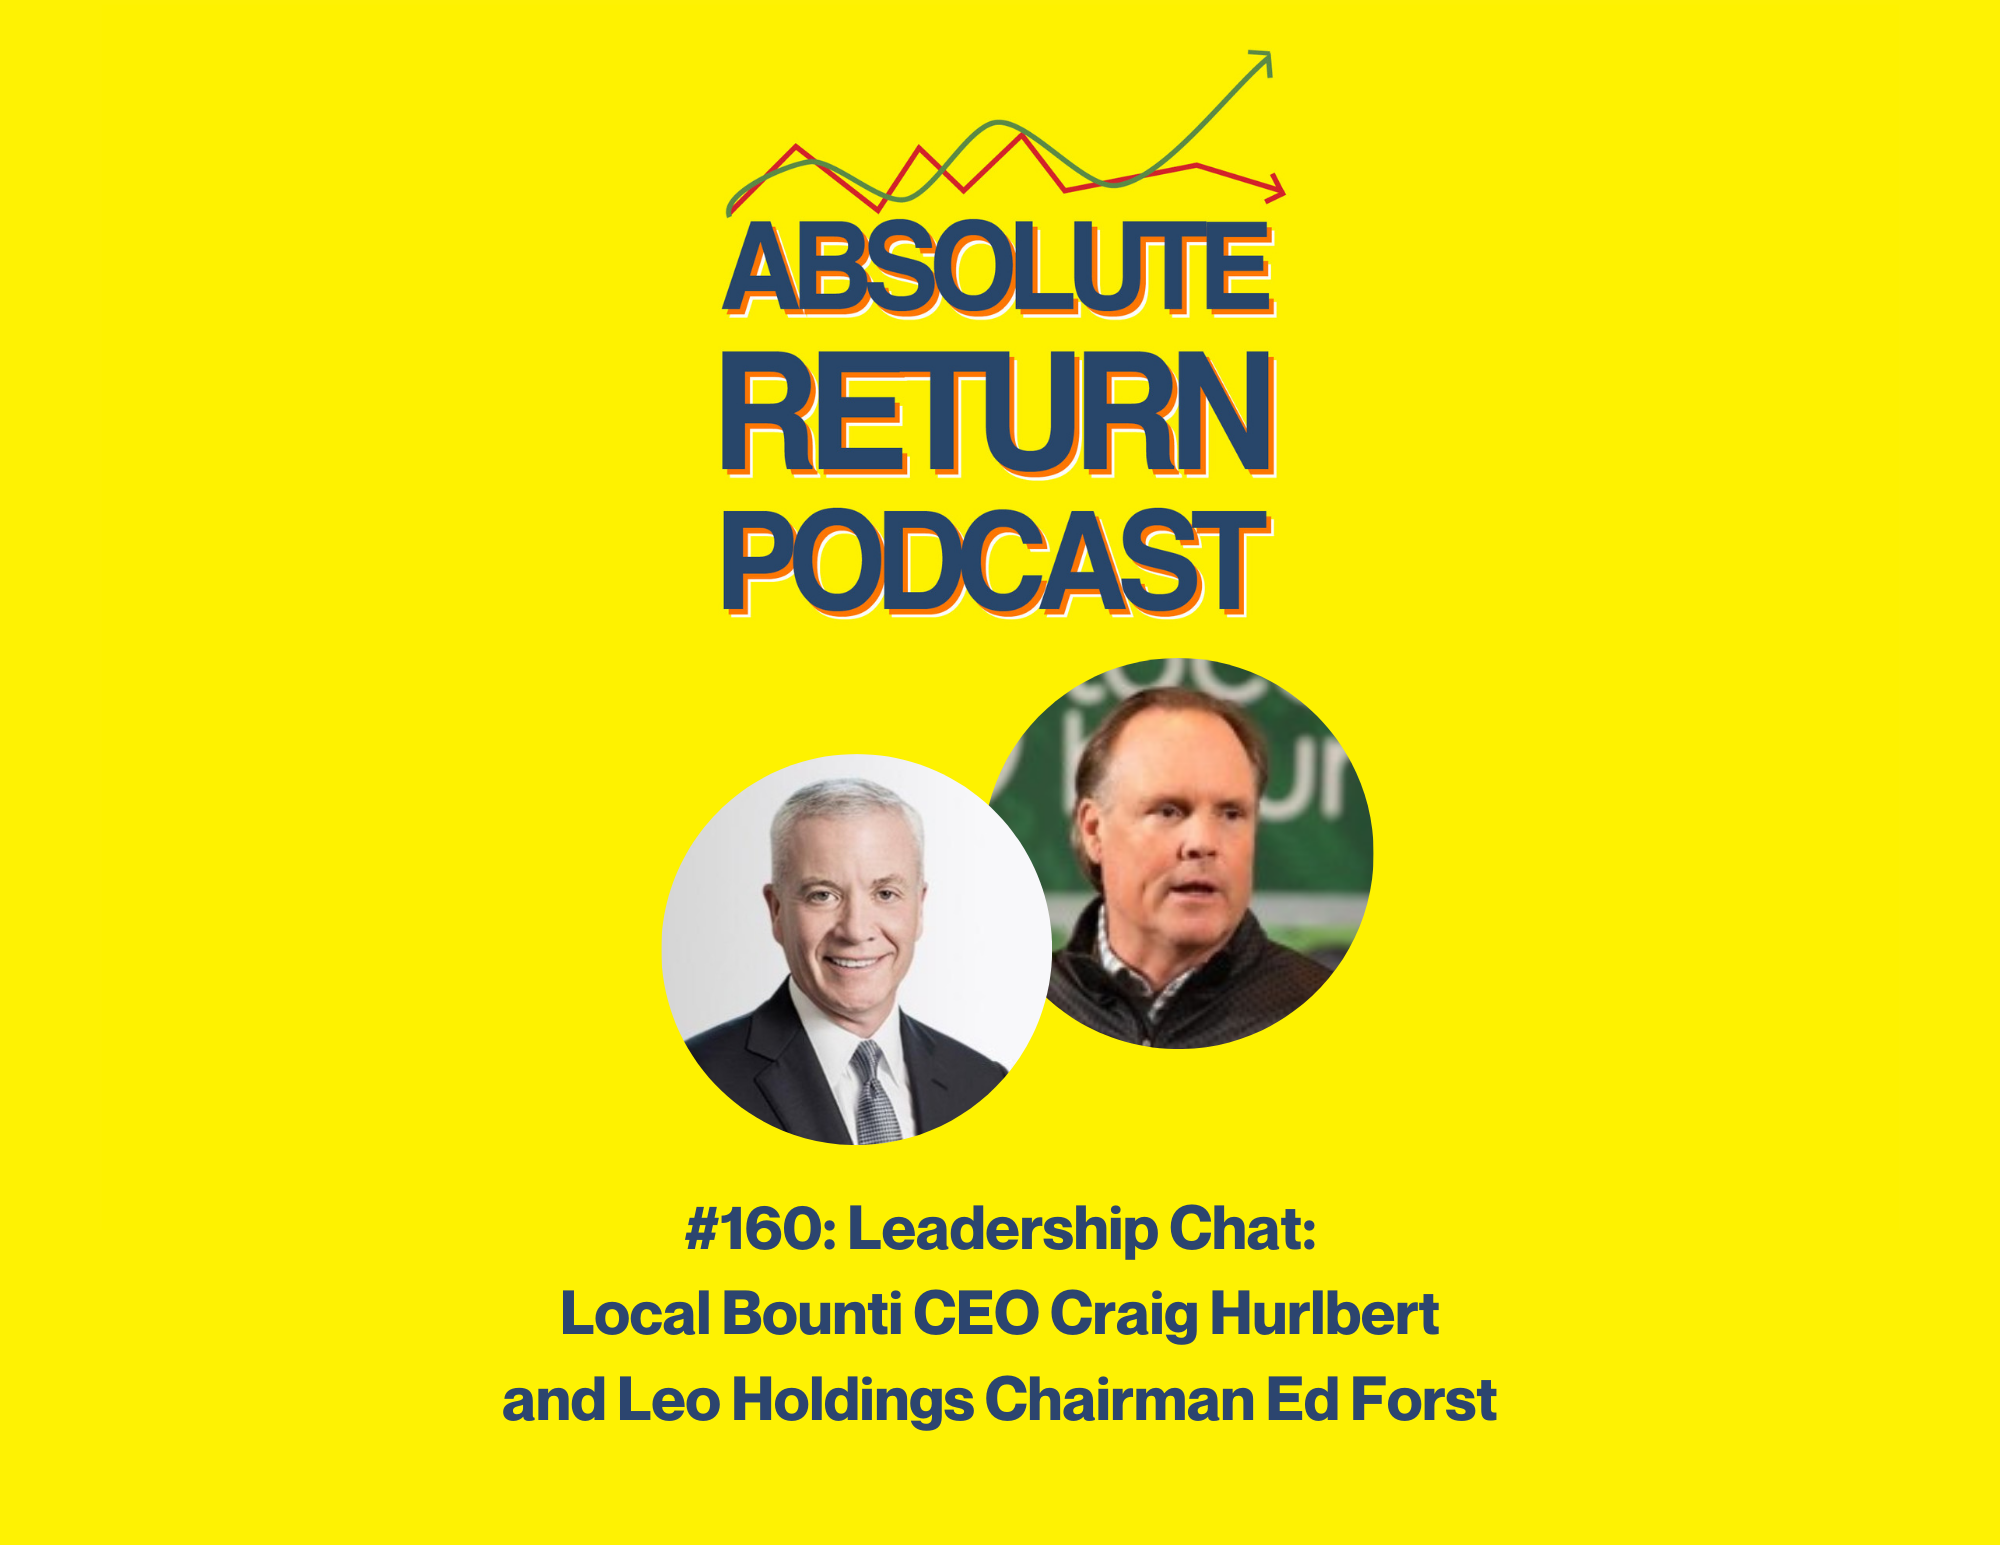 Absolute Return Podcast #160: Leadership Chat: Local Bounti CEO Craig Hurlbert And Leo Holdings Chairman Ed Forst